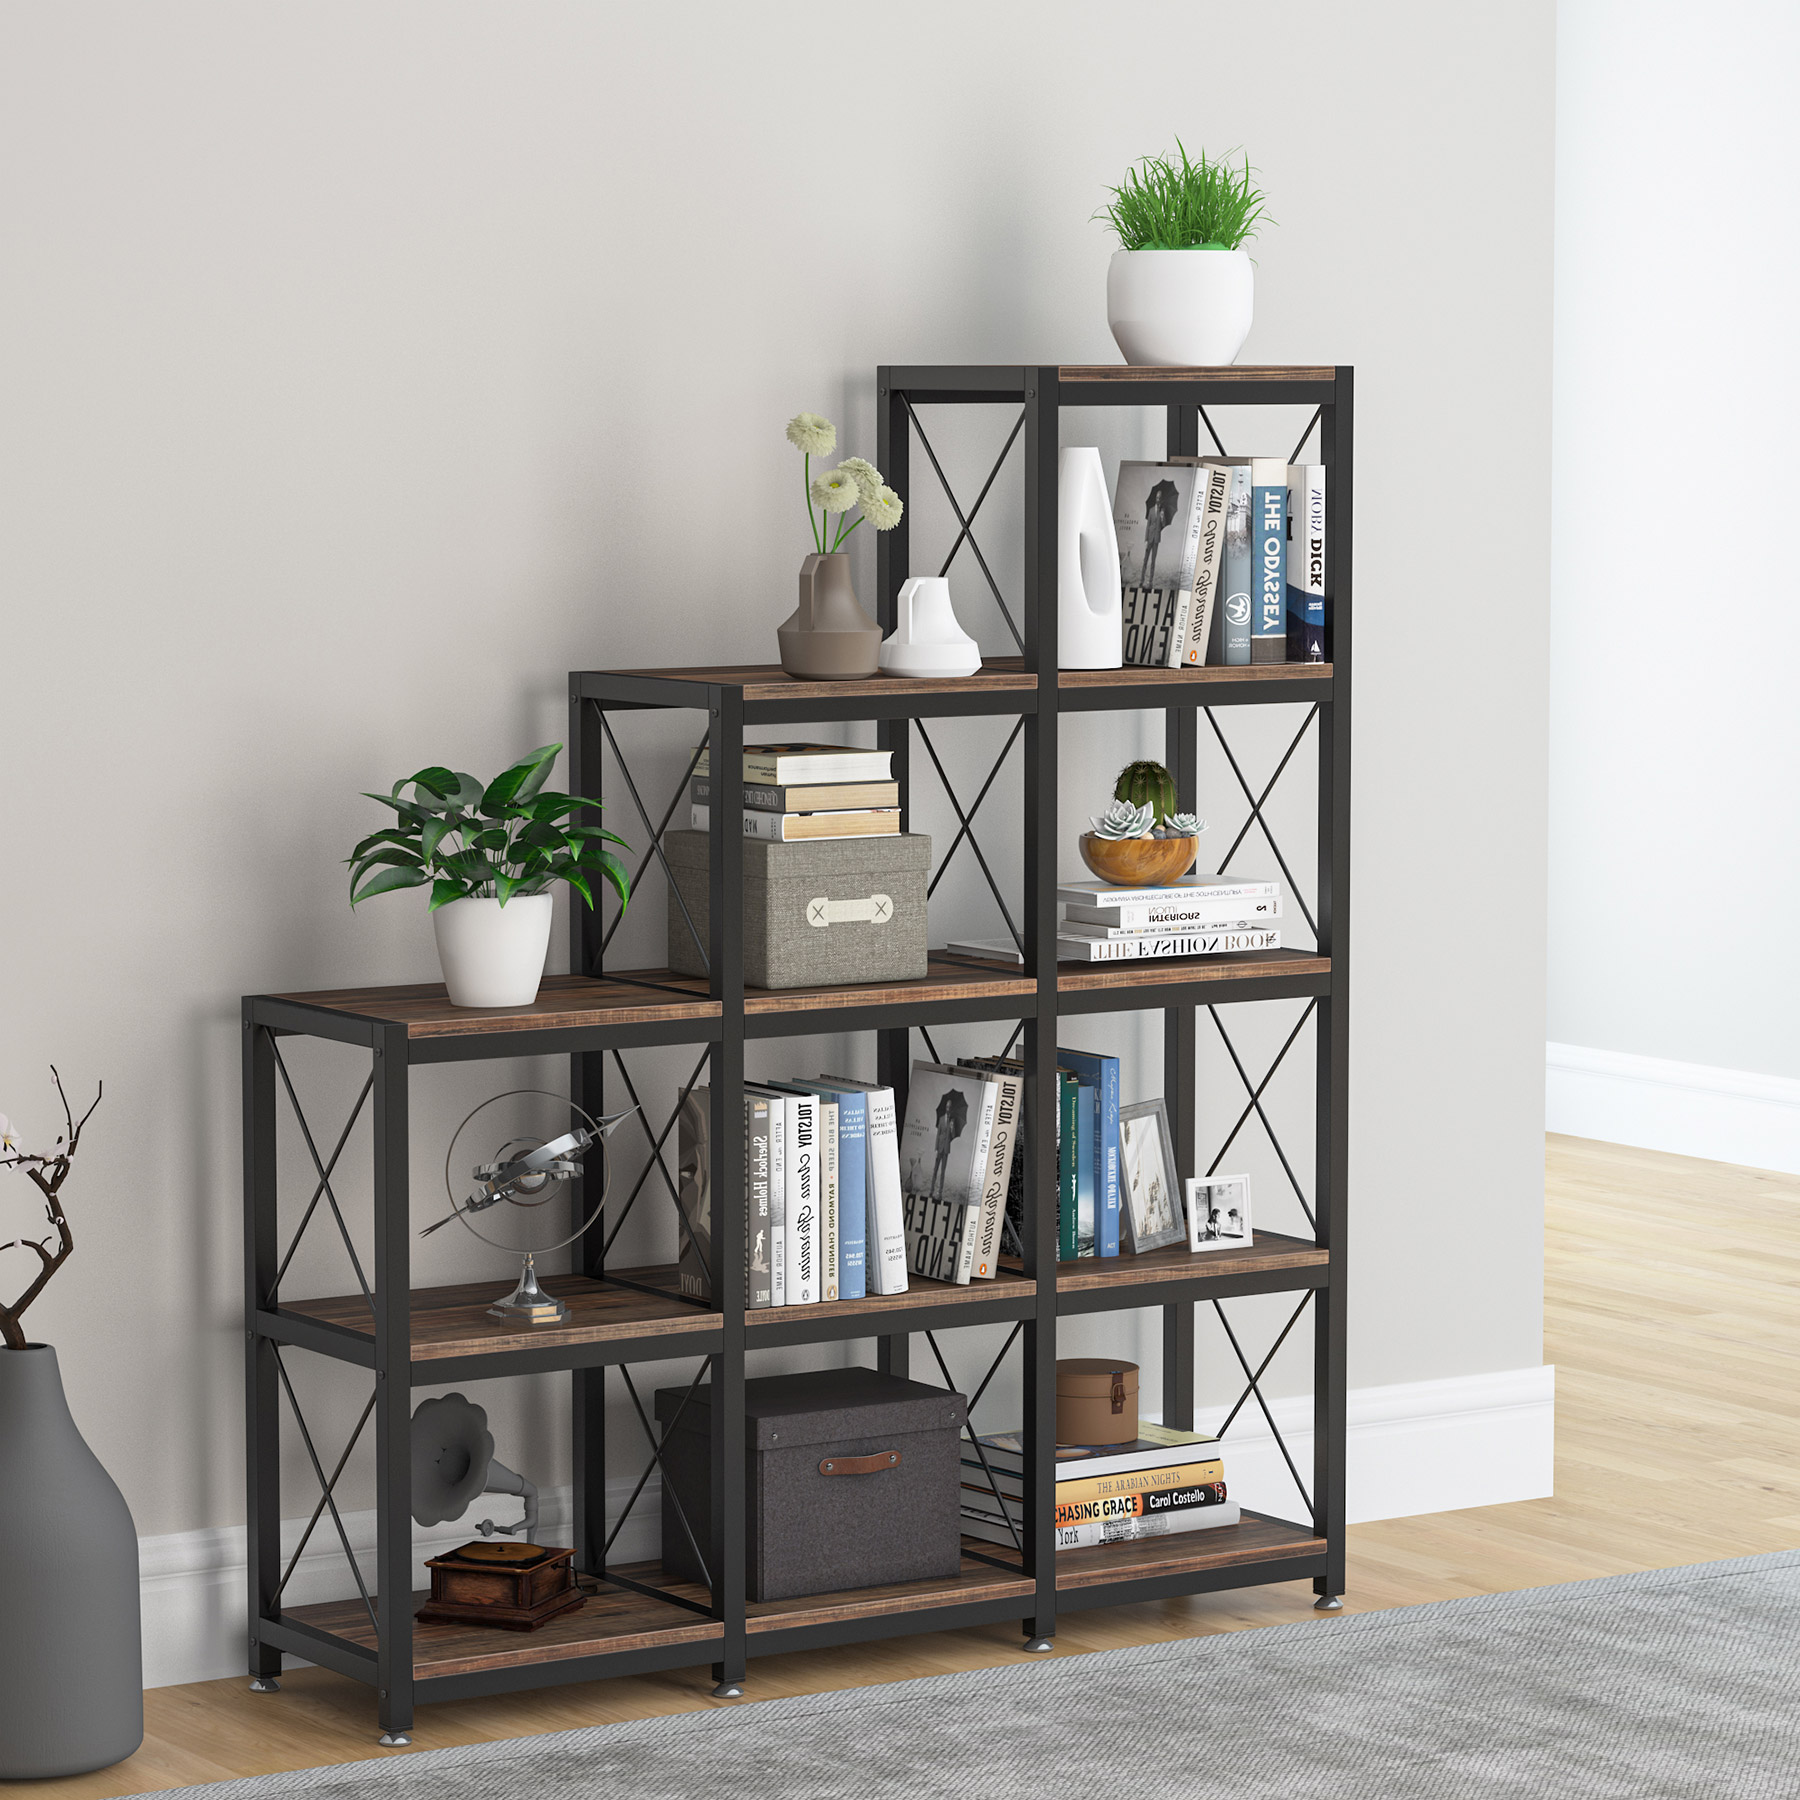 Tribesigns 12-shelf Bookcase, 5-tier Industrial Step Bookshelf for Home Office, Rustic Brown - image 2 of 7